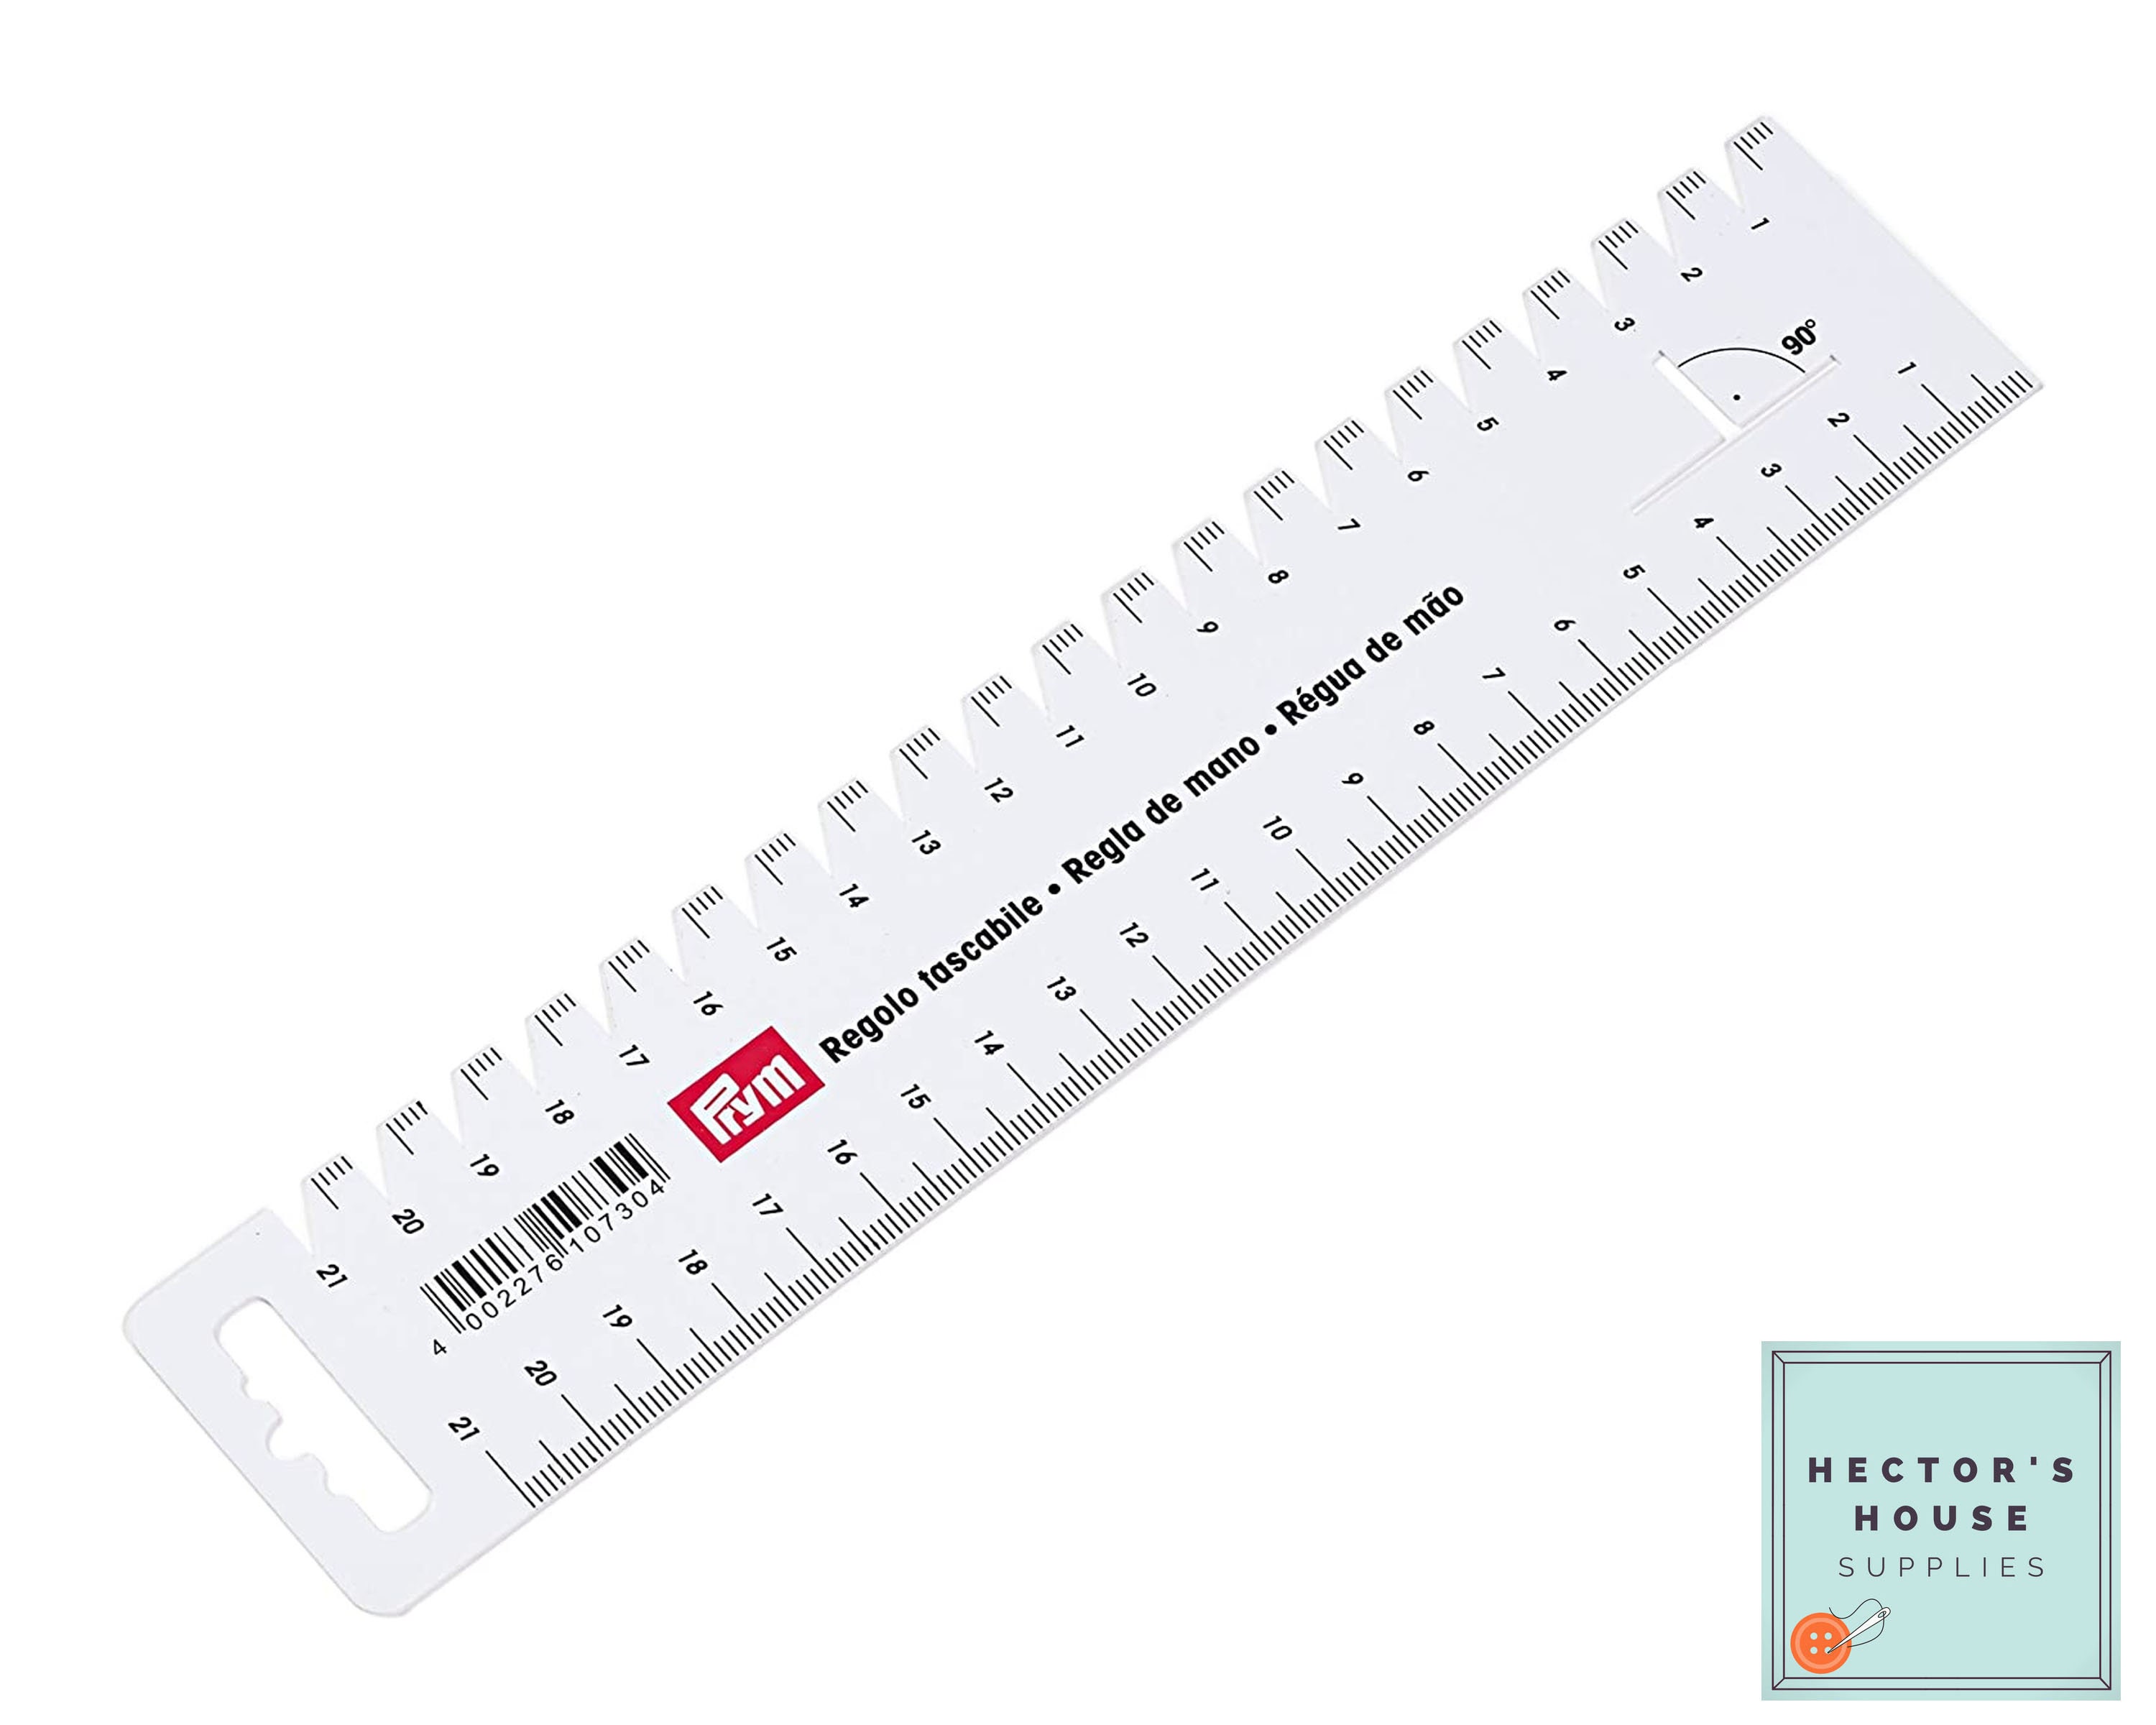 Liquidraw Sewing Ruler Tailor 9 Set Pattern Maker Sewing Rulers